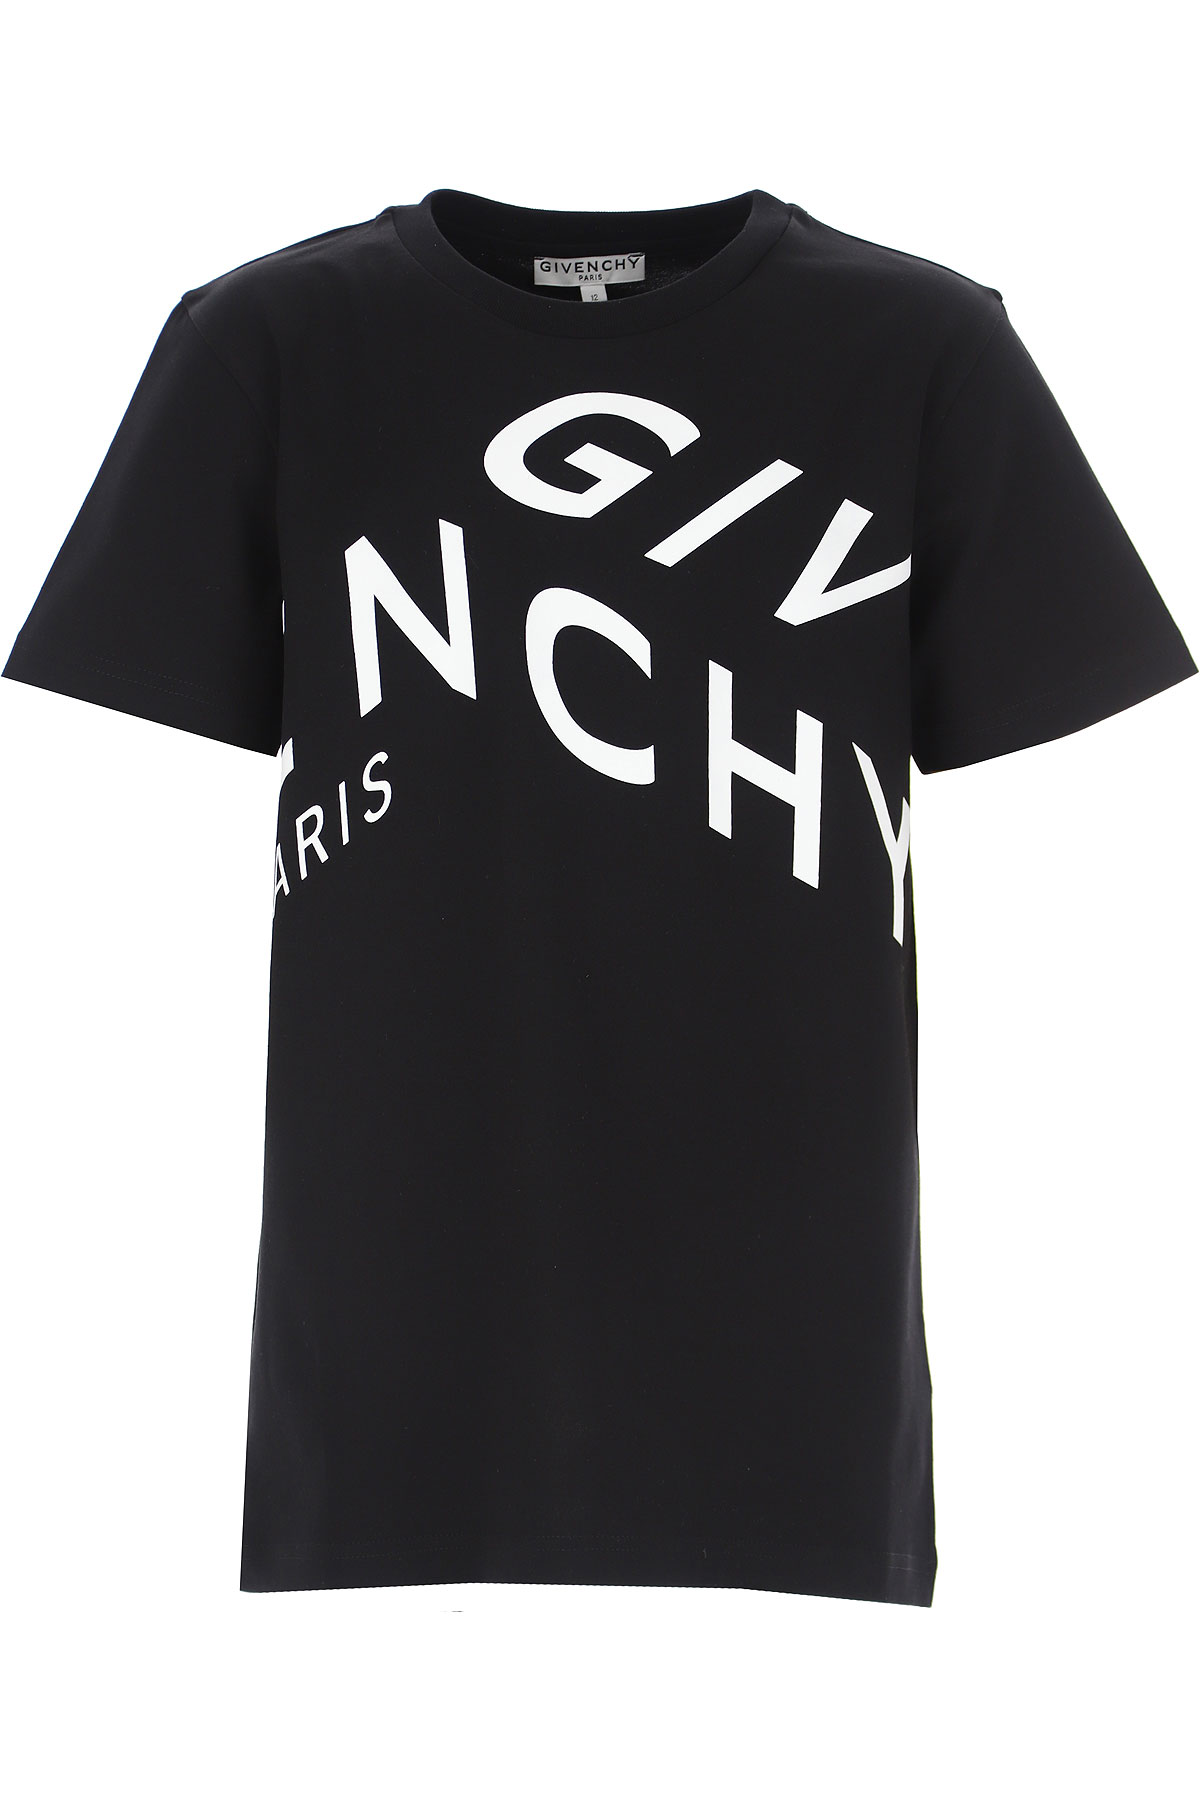 Kidswear Givenchy, Style code: h25245-09-